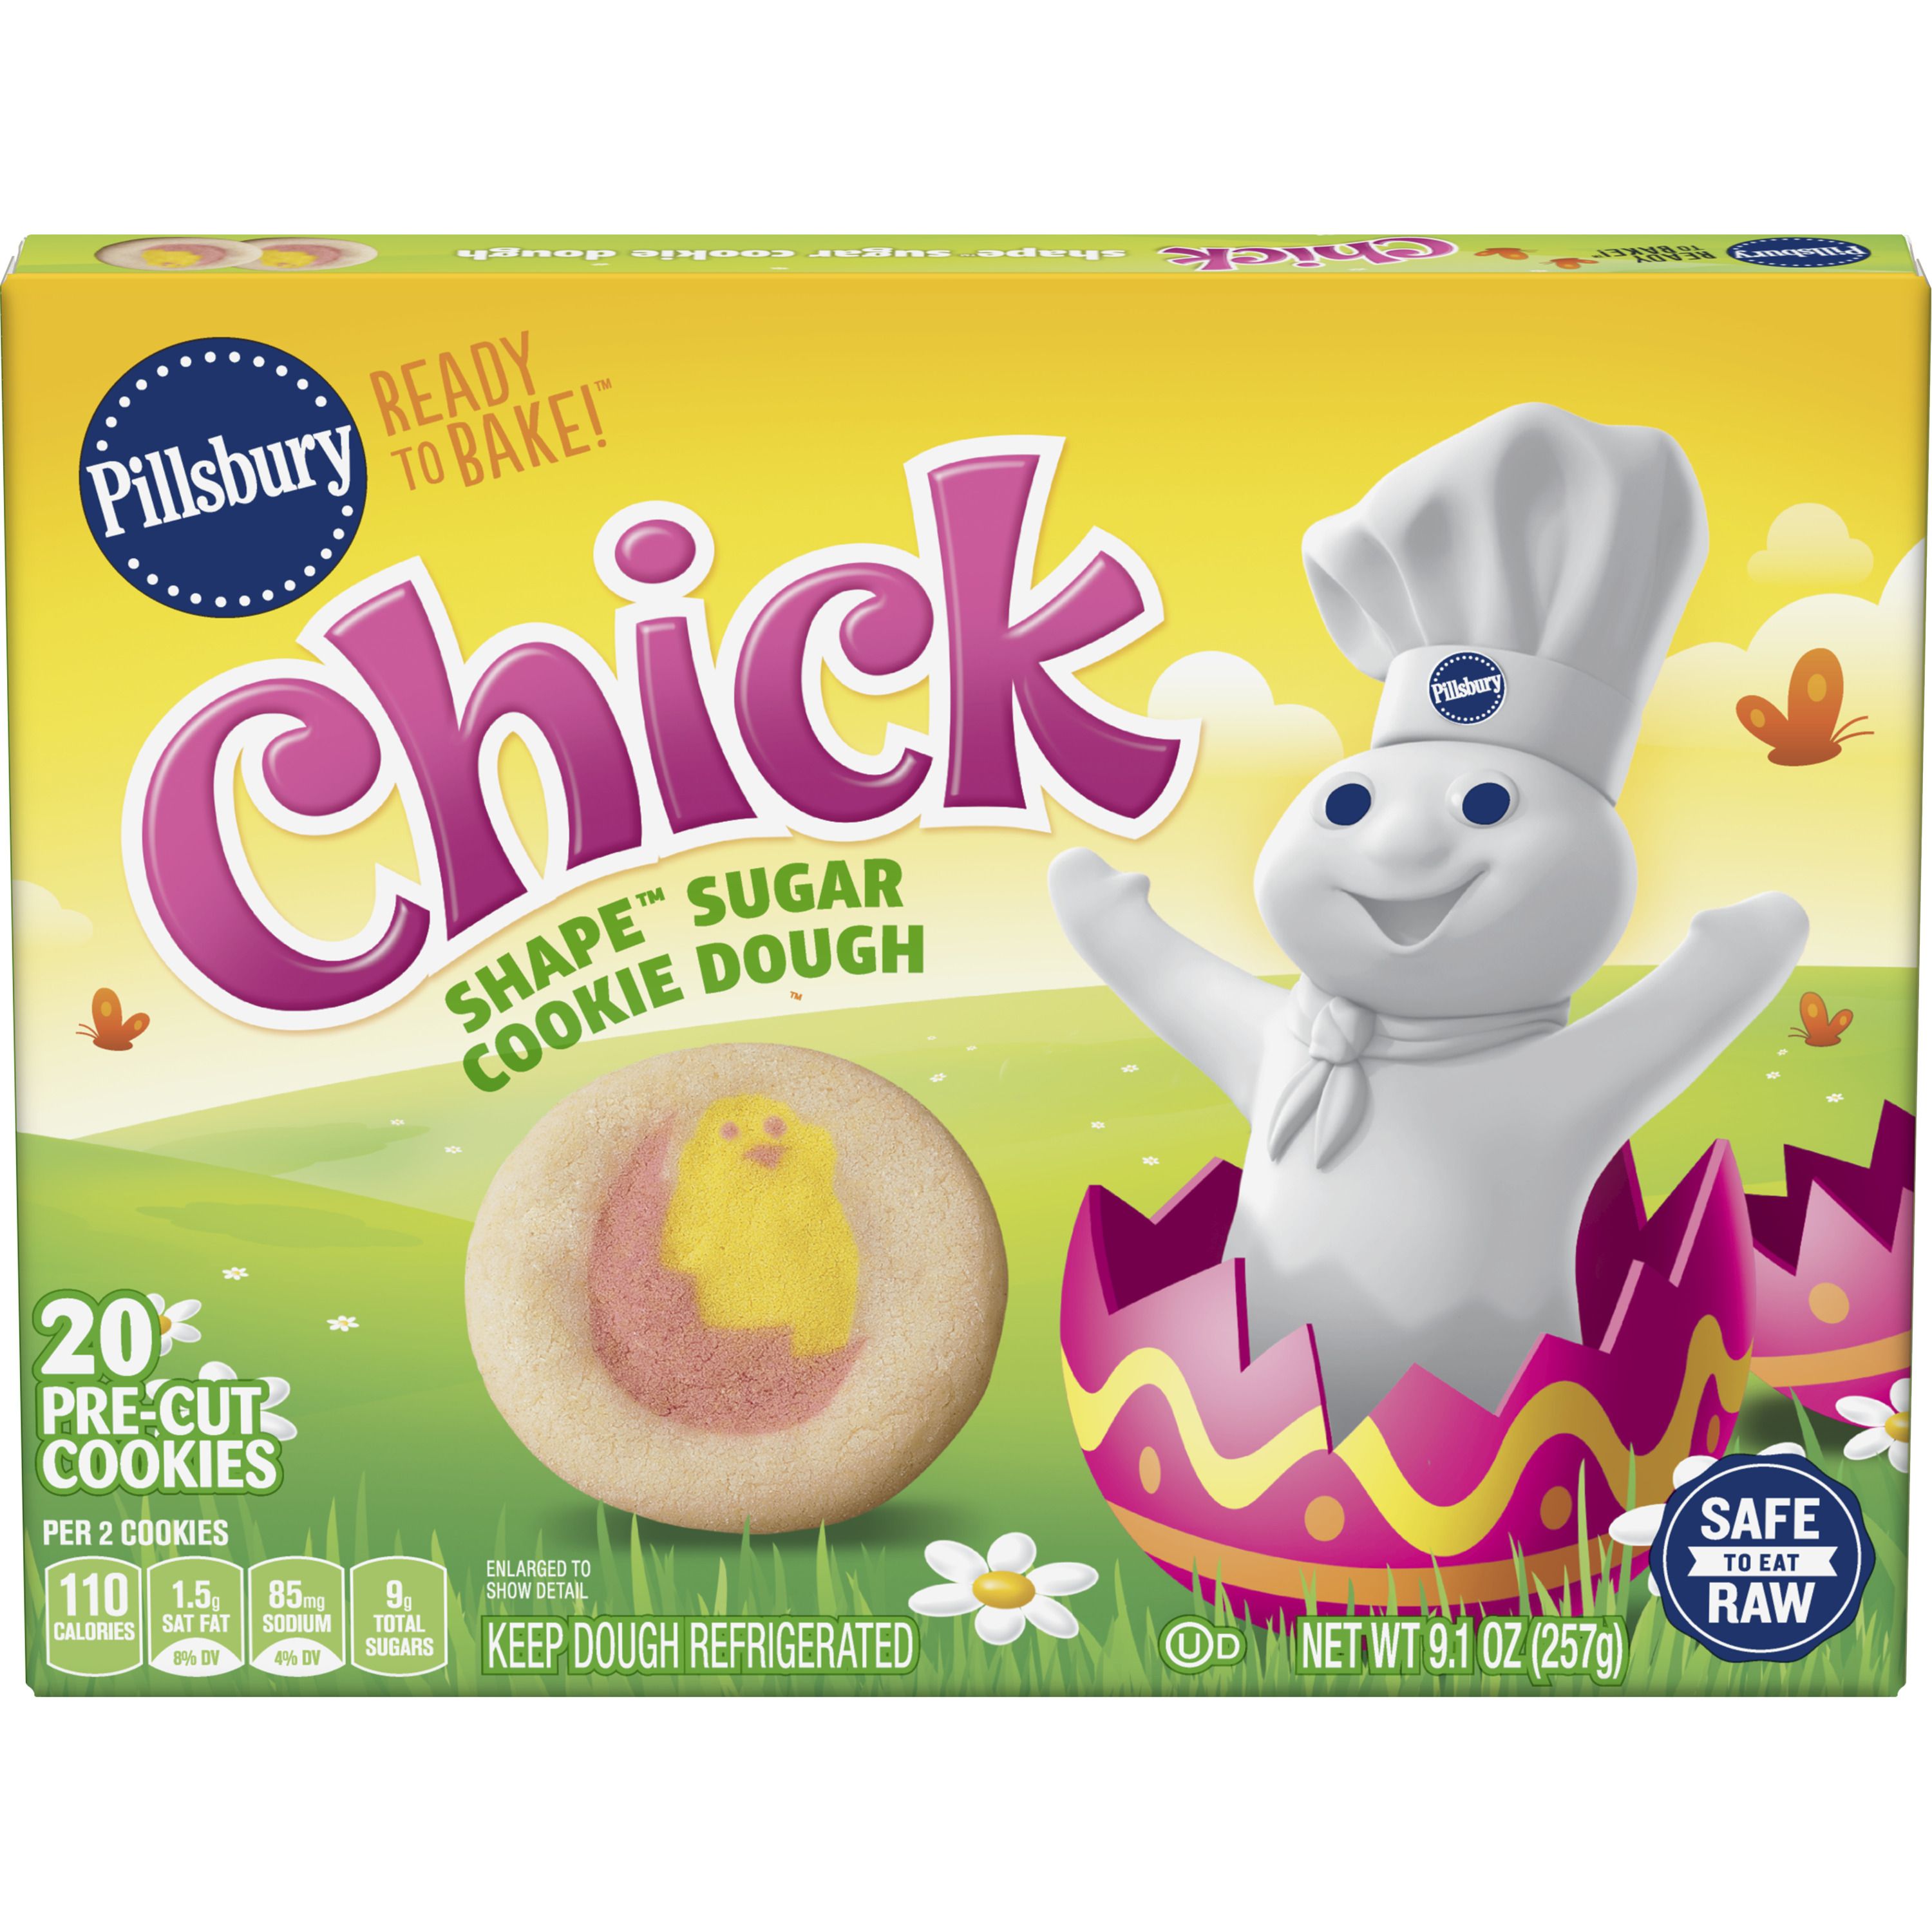 Pillsbury™ Ready to Bake! Chick Shape Sugar Cookie Dough 20 Count - Front